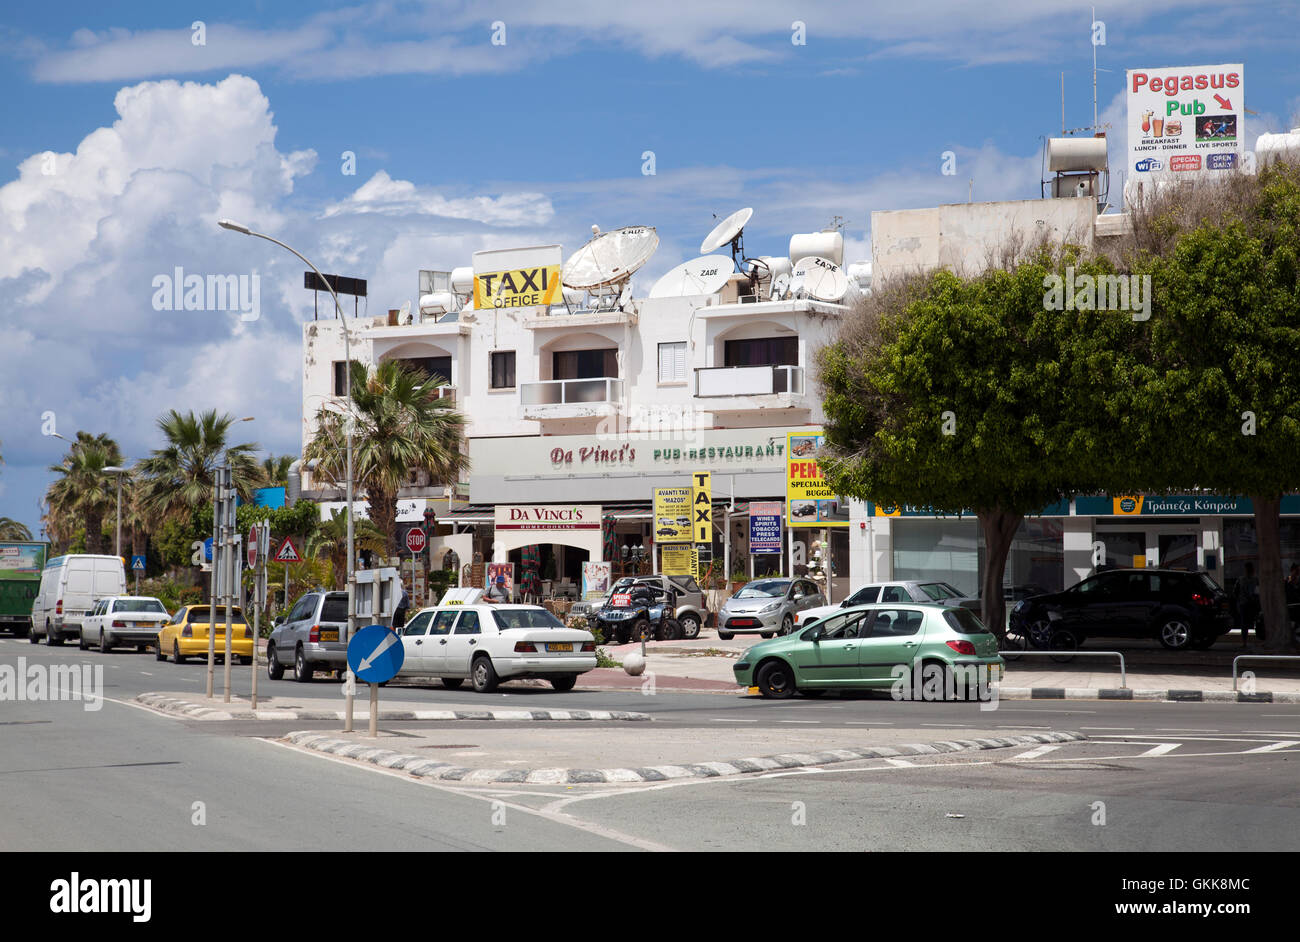 Poseidonos Ave. in Pathos Lined with Restaurants and Shops in Paphos, Cyprus Stock Photo